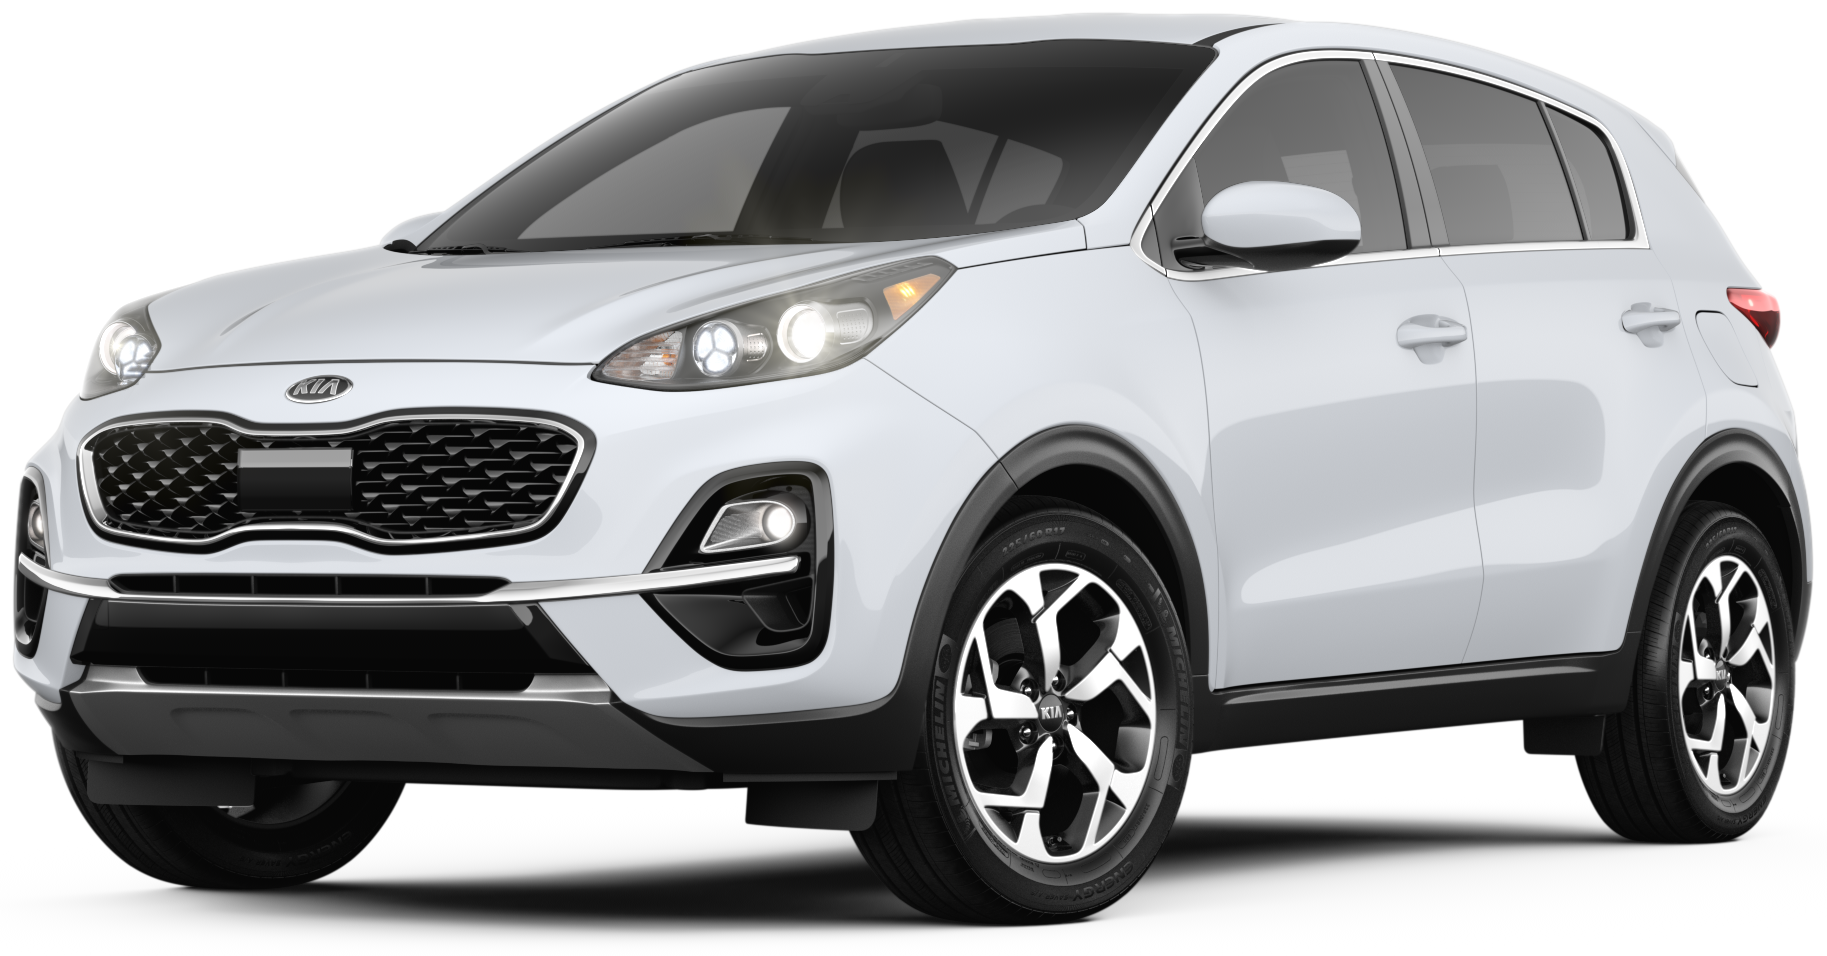 New & Used Cars for Sale | Kia of Lansing Car Dealers